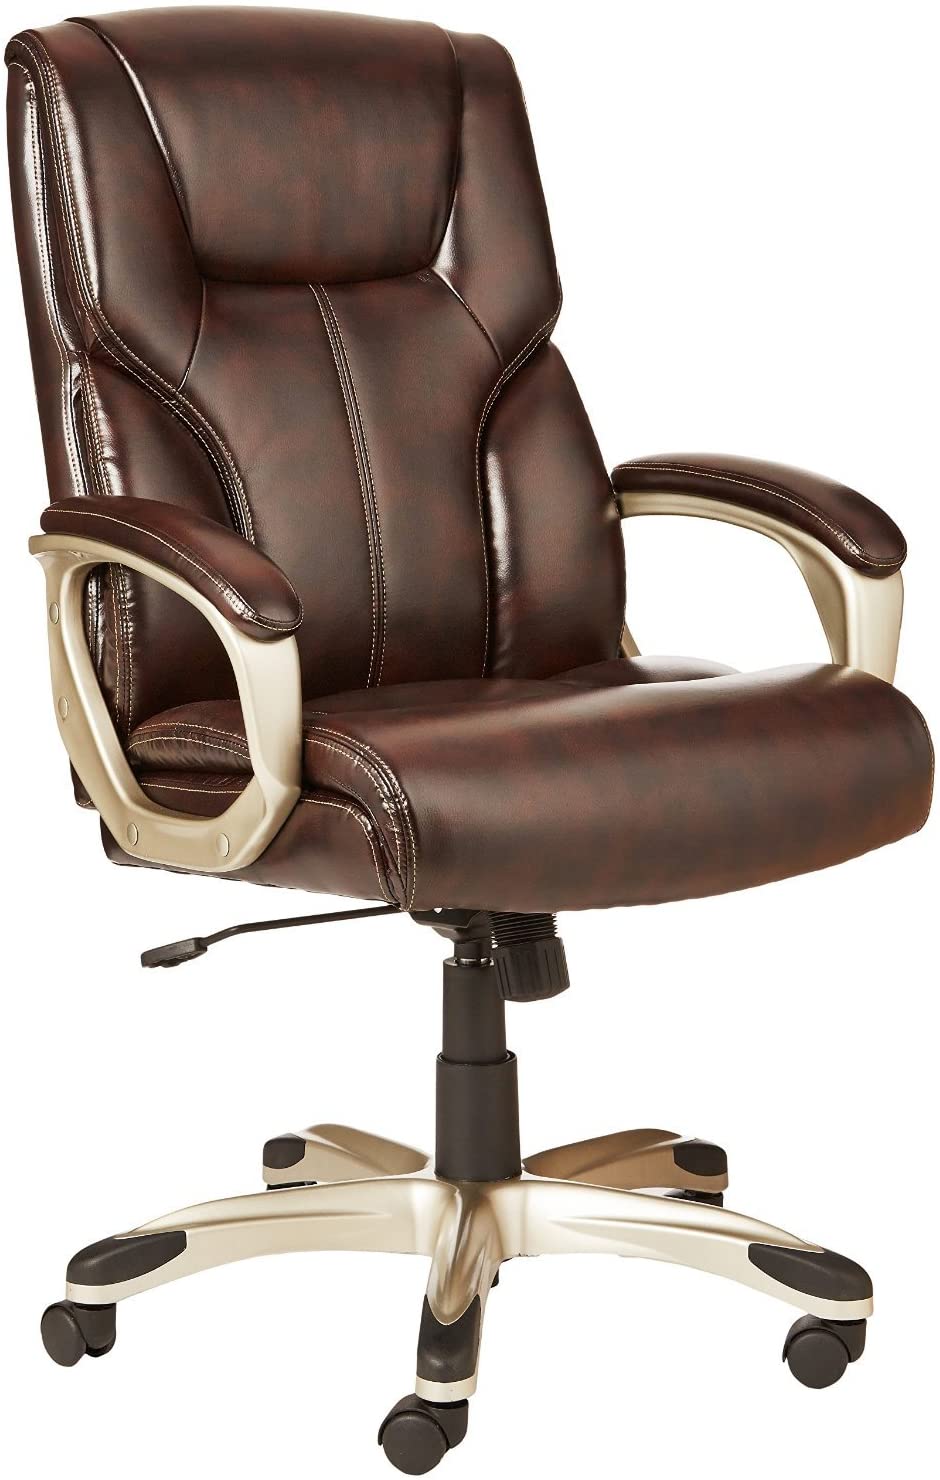 AmazonBasics High-Back, Leather Executive, Swivel, Adjustable Office Desk Chair with Casters, Brown